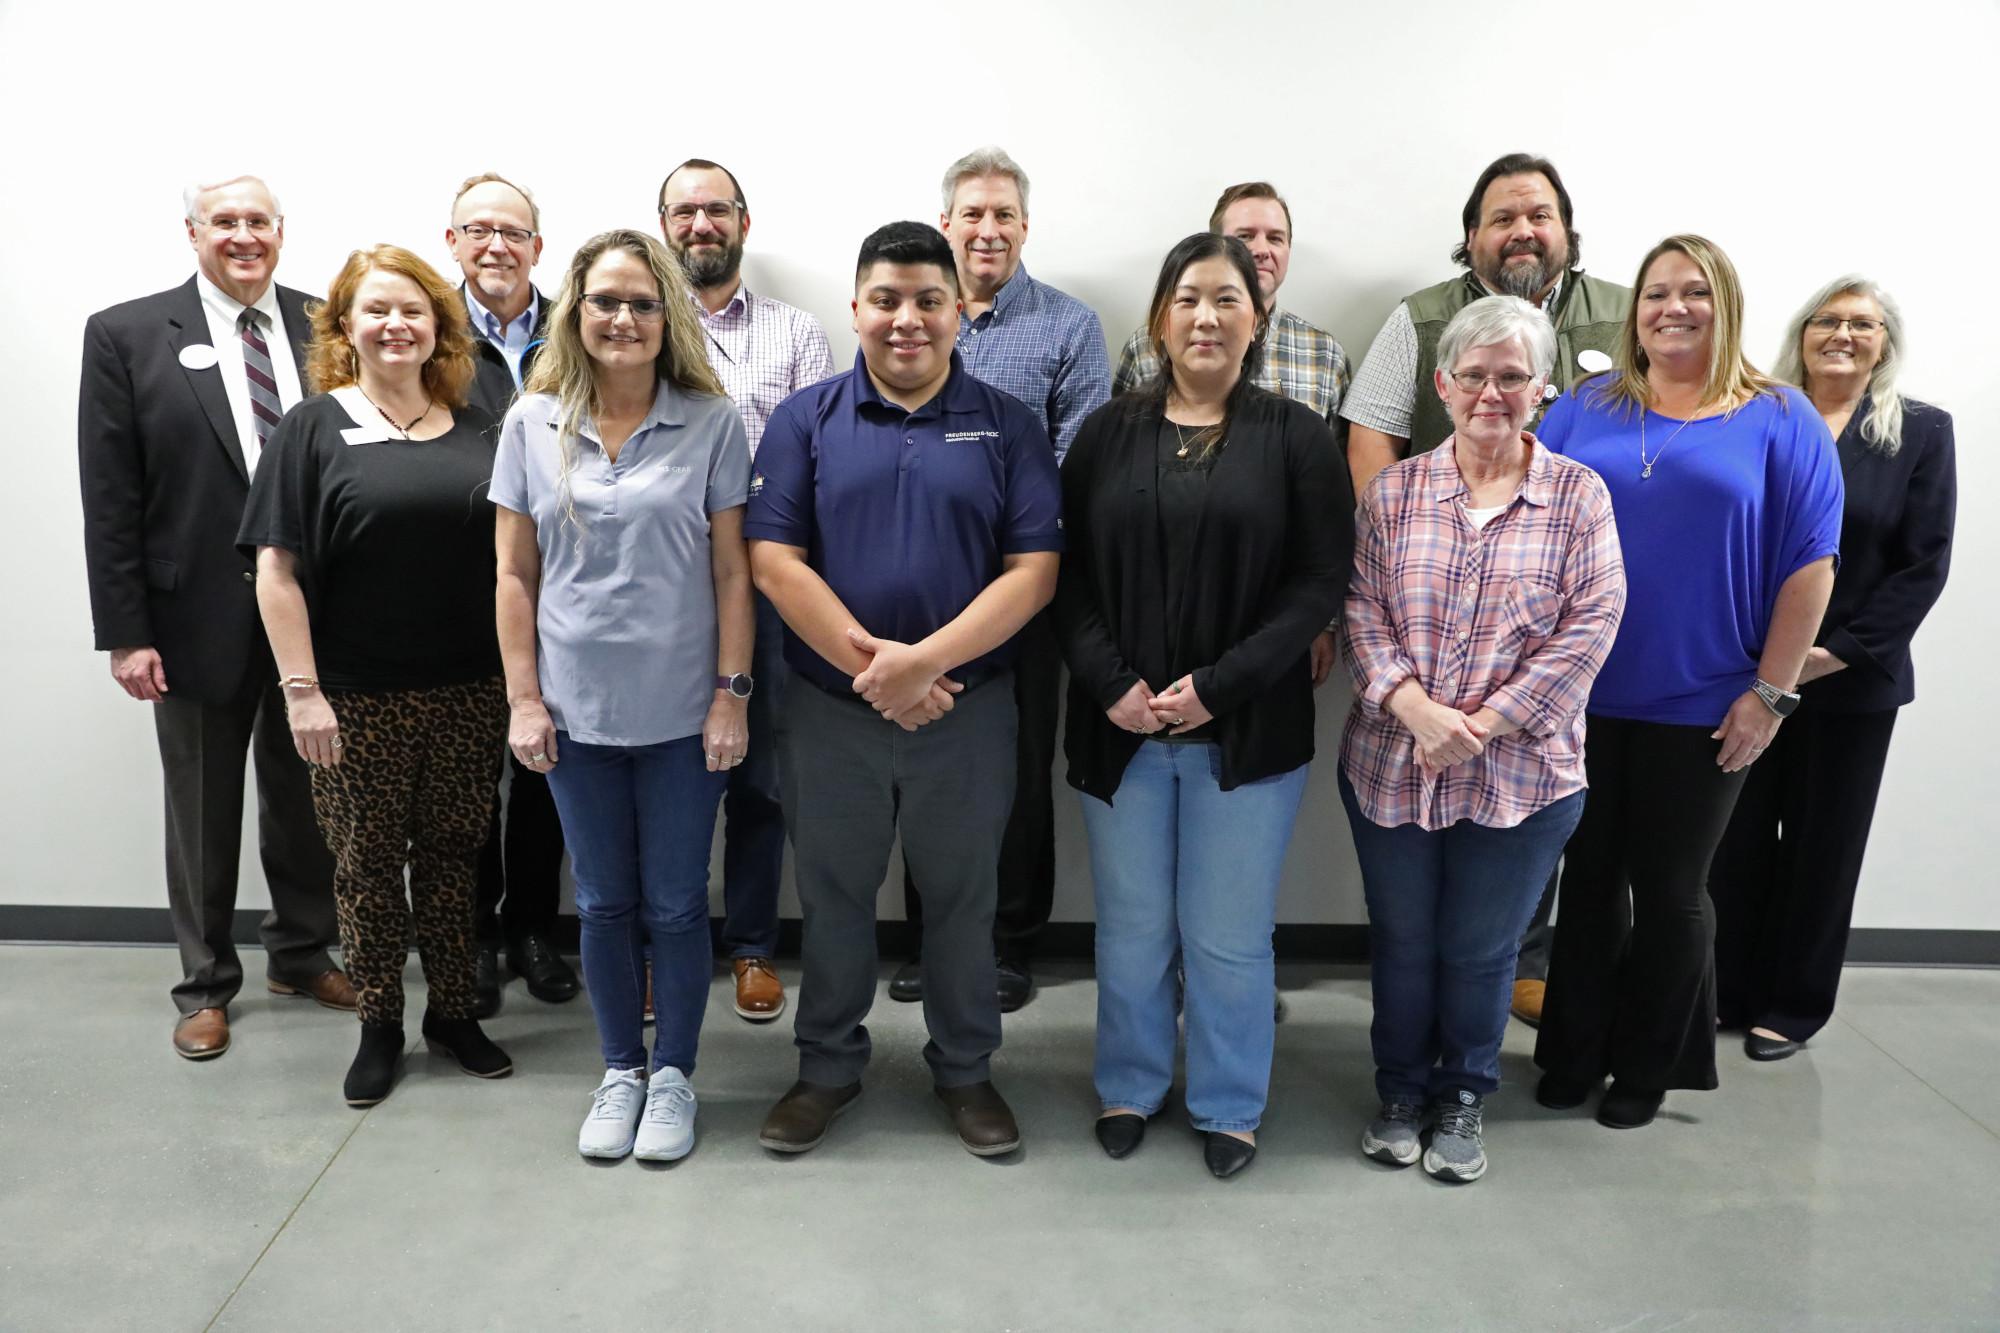 Cristy Norris with Murray Plastics, Gaspar Pedro Gomez with NOK-Freudenberg, Shaprelle
Gunnells with IMS Gear, and Bee Yang from Tsubaki-Nakashima all strived to elevate their skills in support of their employers.